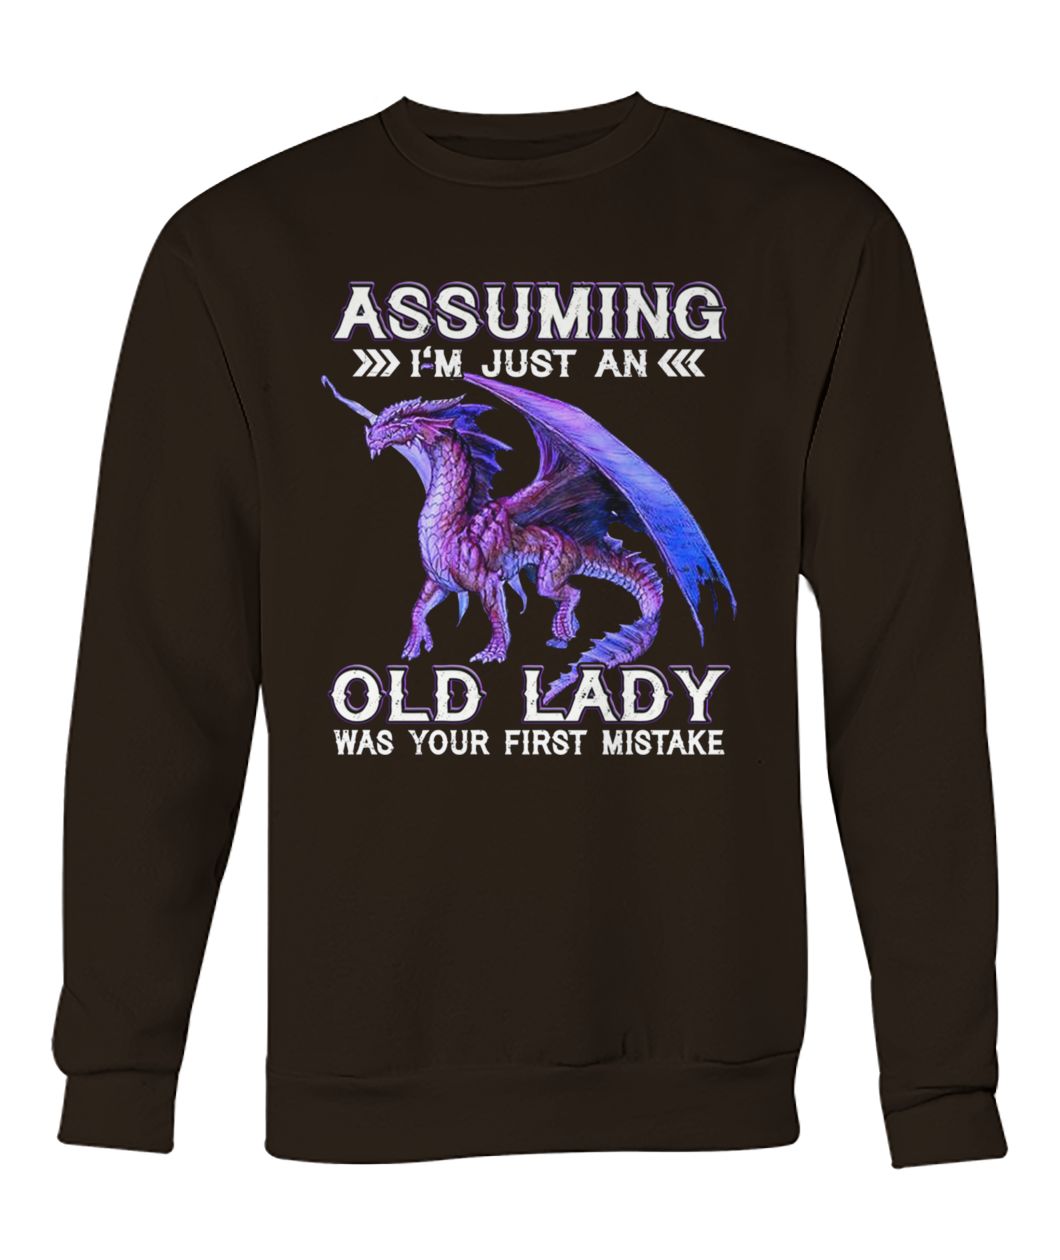 Purple dragon assuming I'm just an old lady was your first mistake crew neck sweatshirt